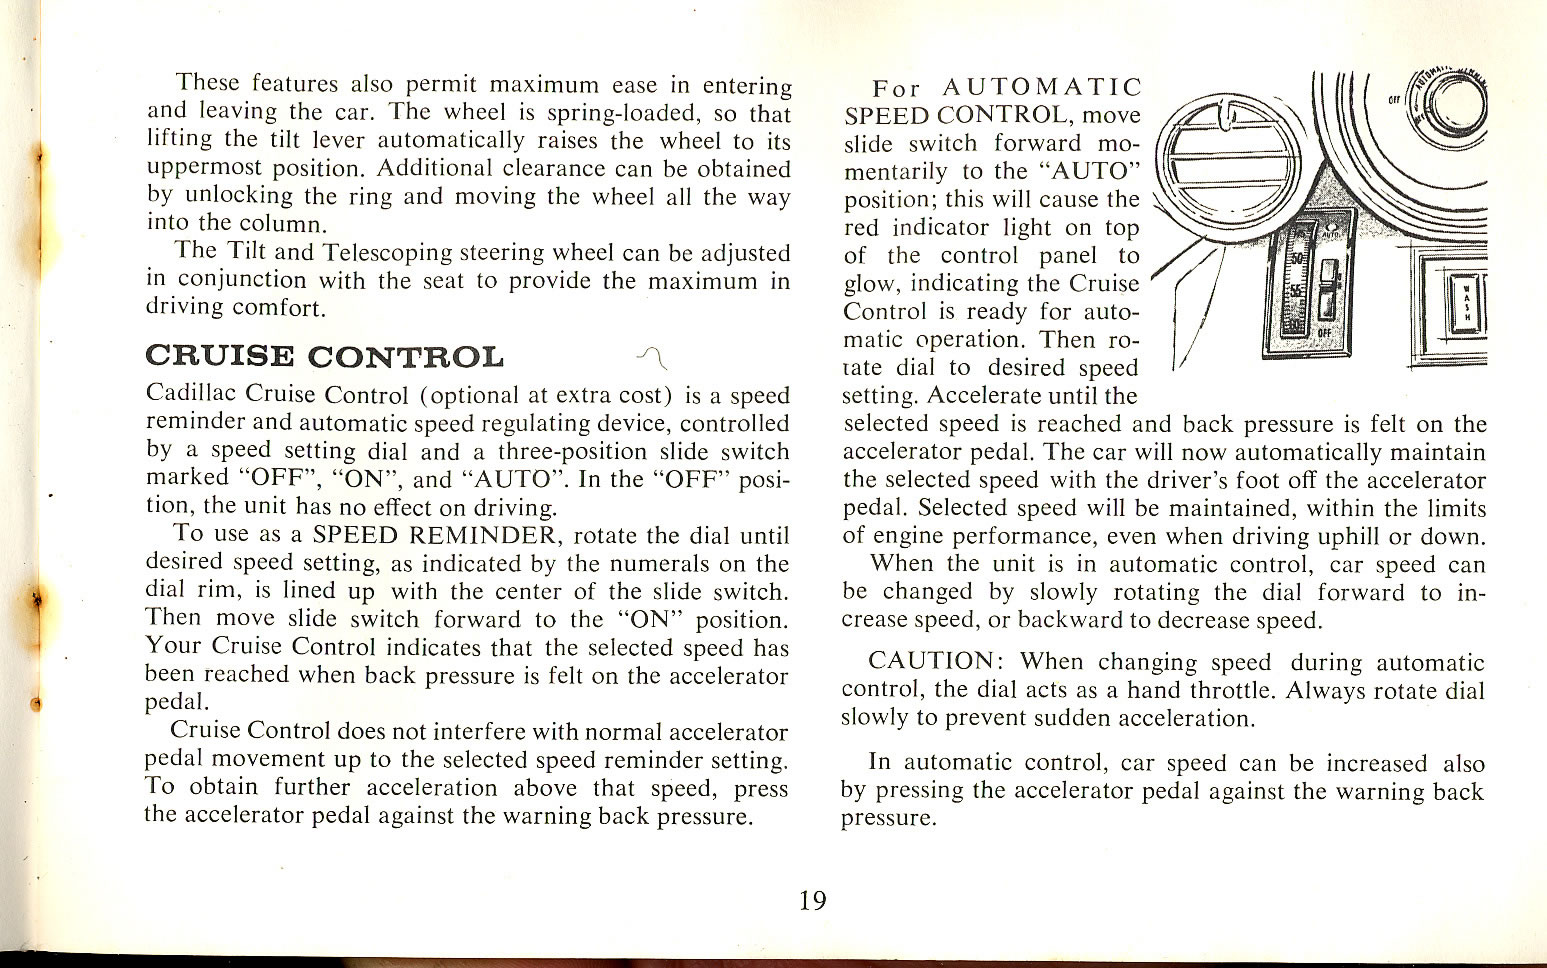 1965 Cadillac Owners Manual Page 23